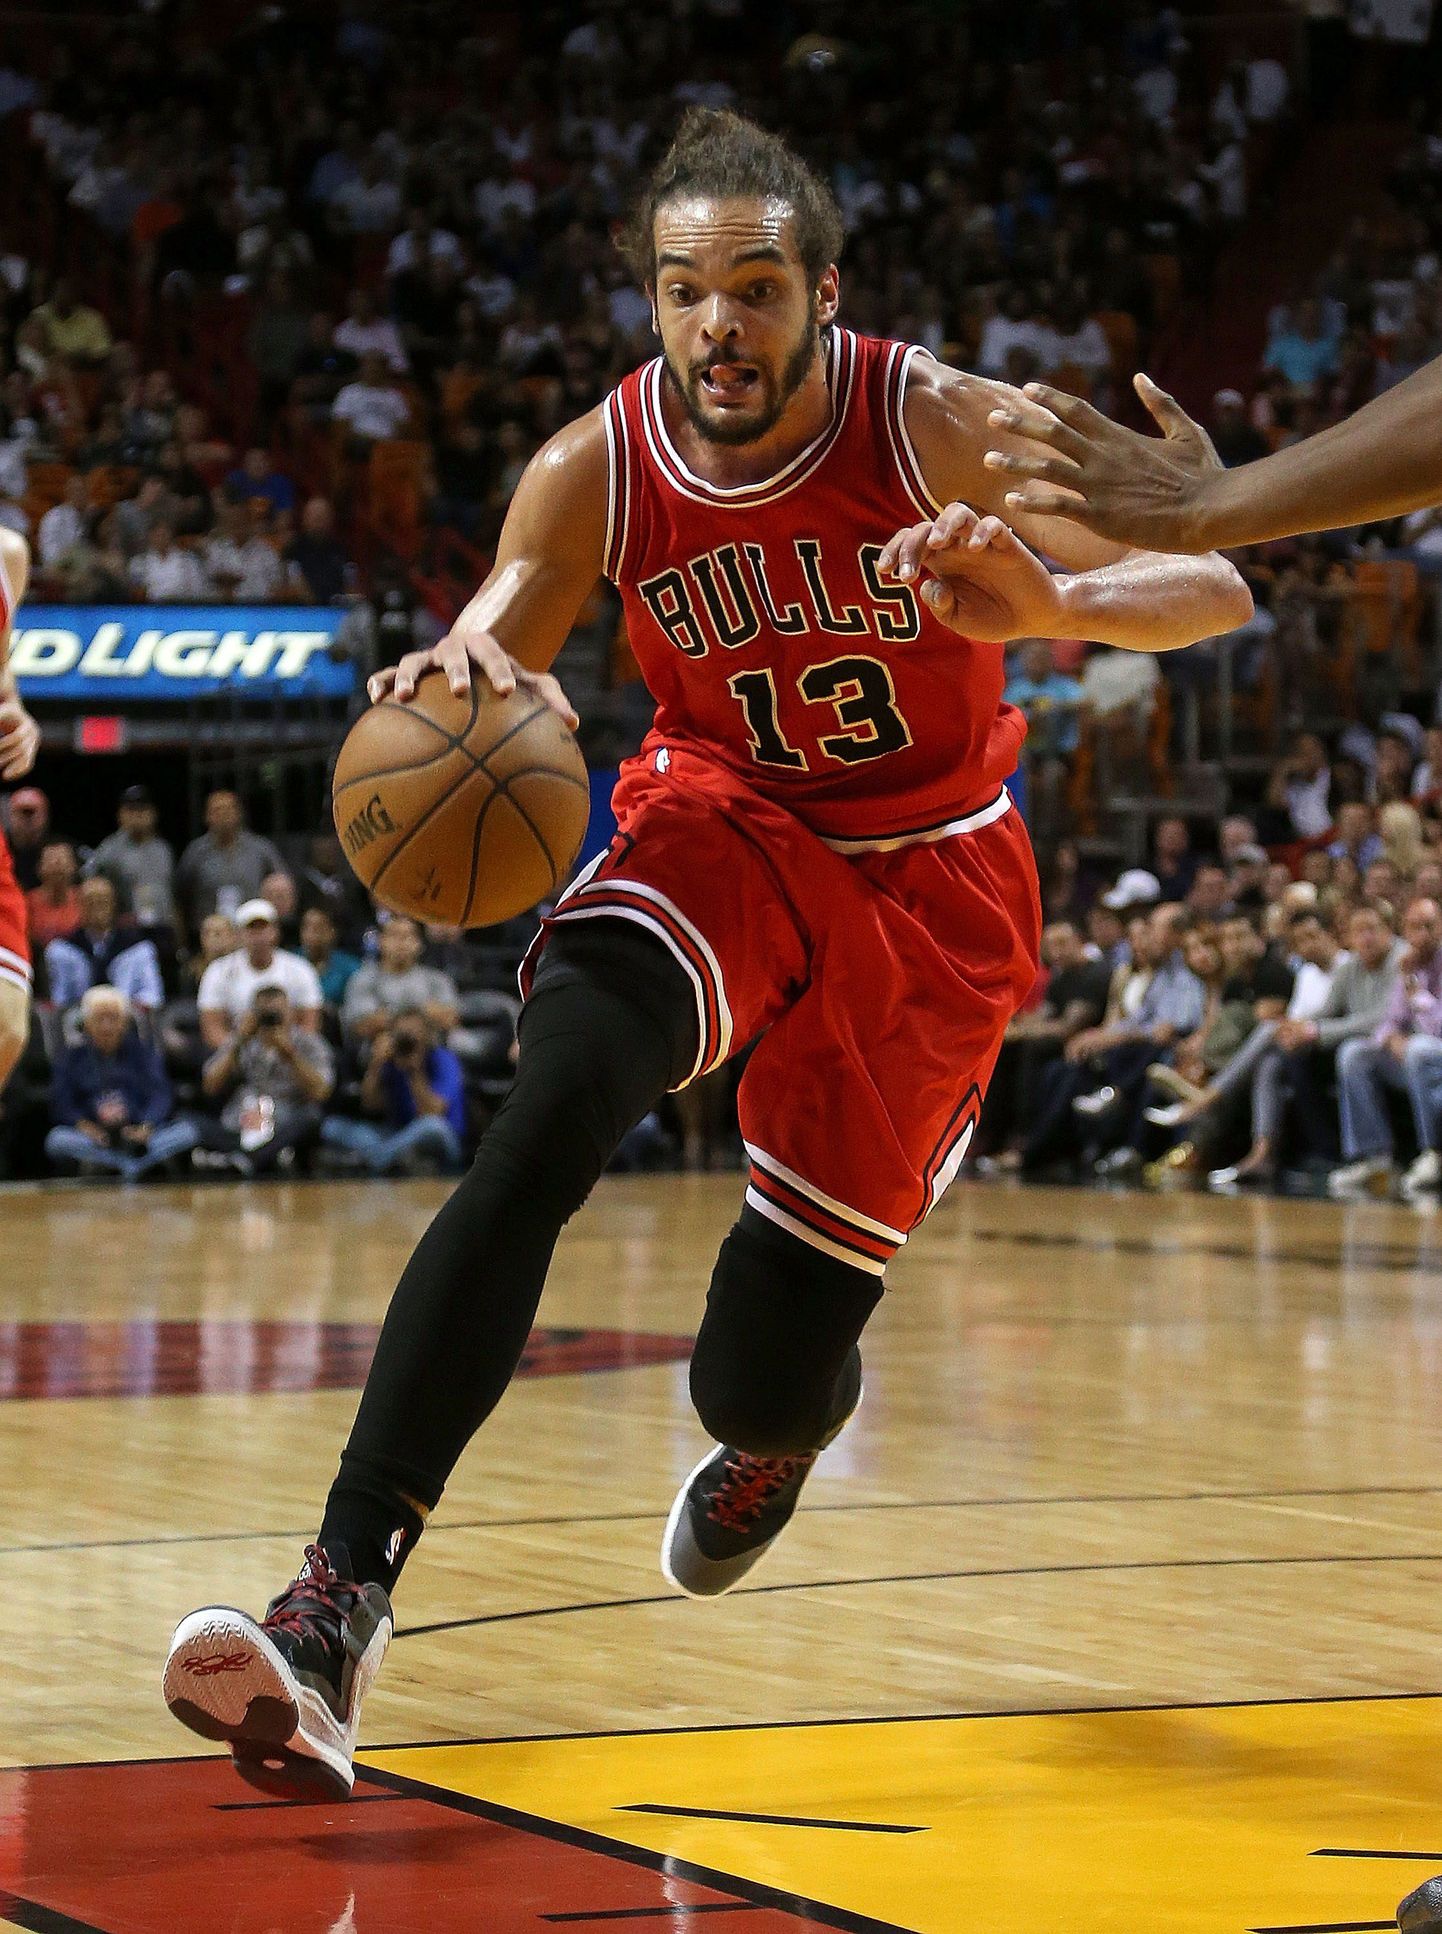 MIAMI, FL - APRIL 09: Joakim Noah #13 of the Chicago Bulls drives to the basket during a game against the Miami Heat at American Airlines Arena on April 9, 2015 in Miami, Florida. NOTE TO USER: User expressly acknowledges and agrees that, by downloading and/or using this photograph, user is consenting to the terms and conditions of the Getty Images License Agreement. Mandatory copyright notice:   Mike Ehrmann/Getty Images/AFP
== FOR NEWSPAPERS, INTERNET, TELCOS & TELEVISION USE ONLY ==